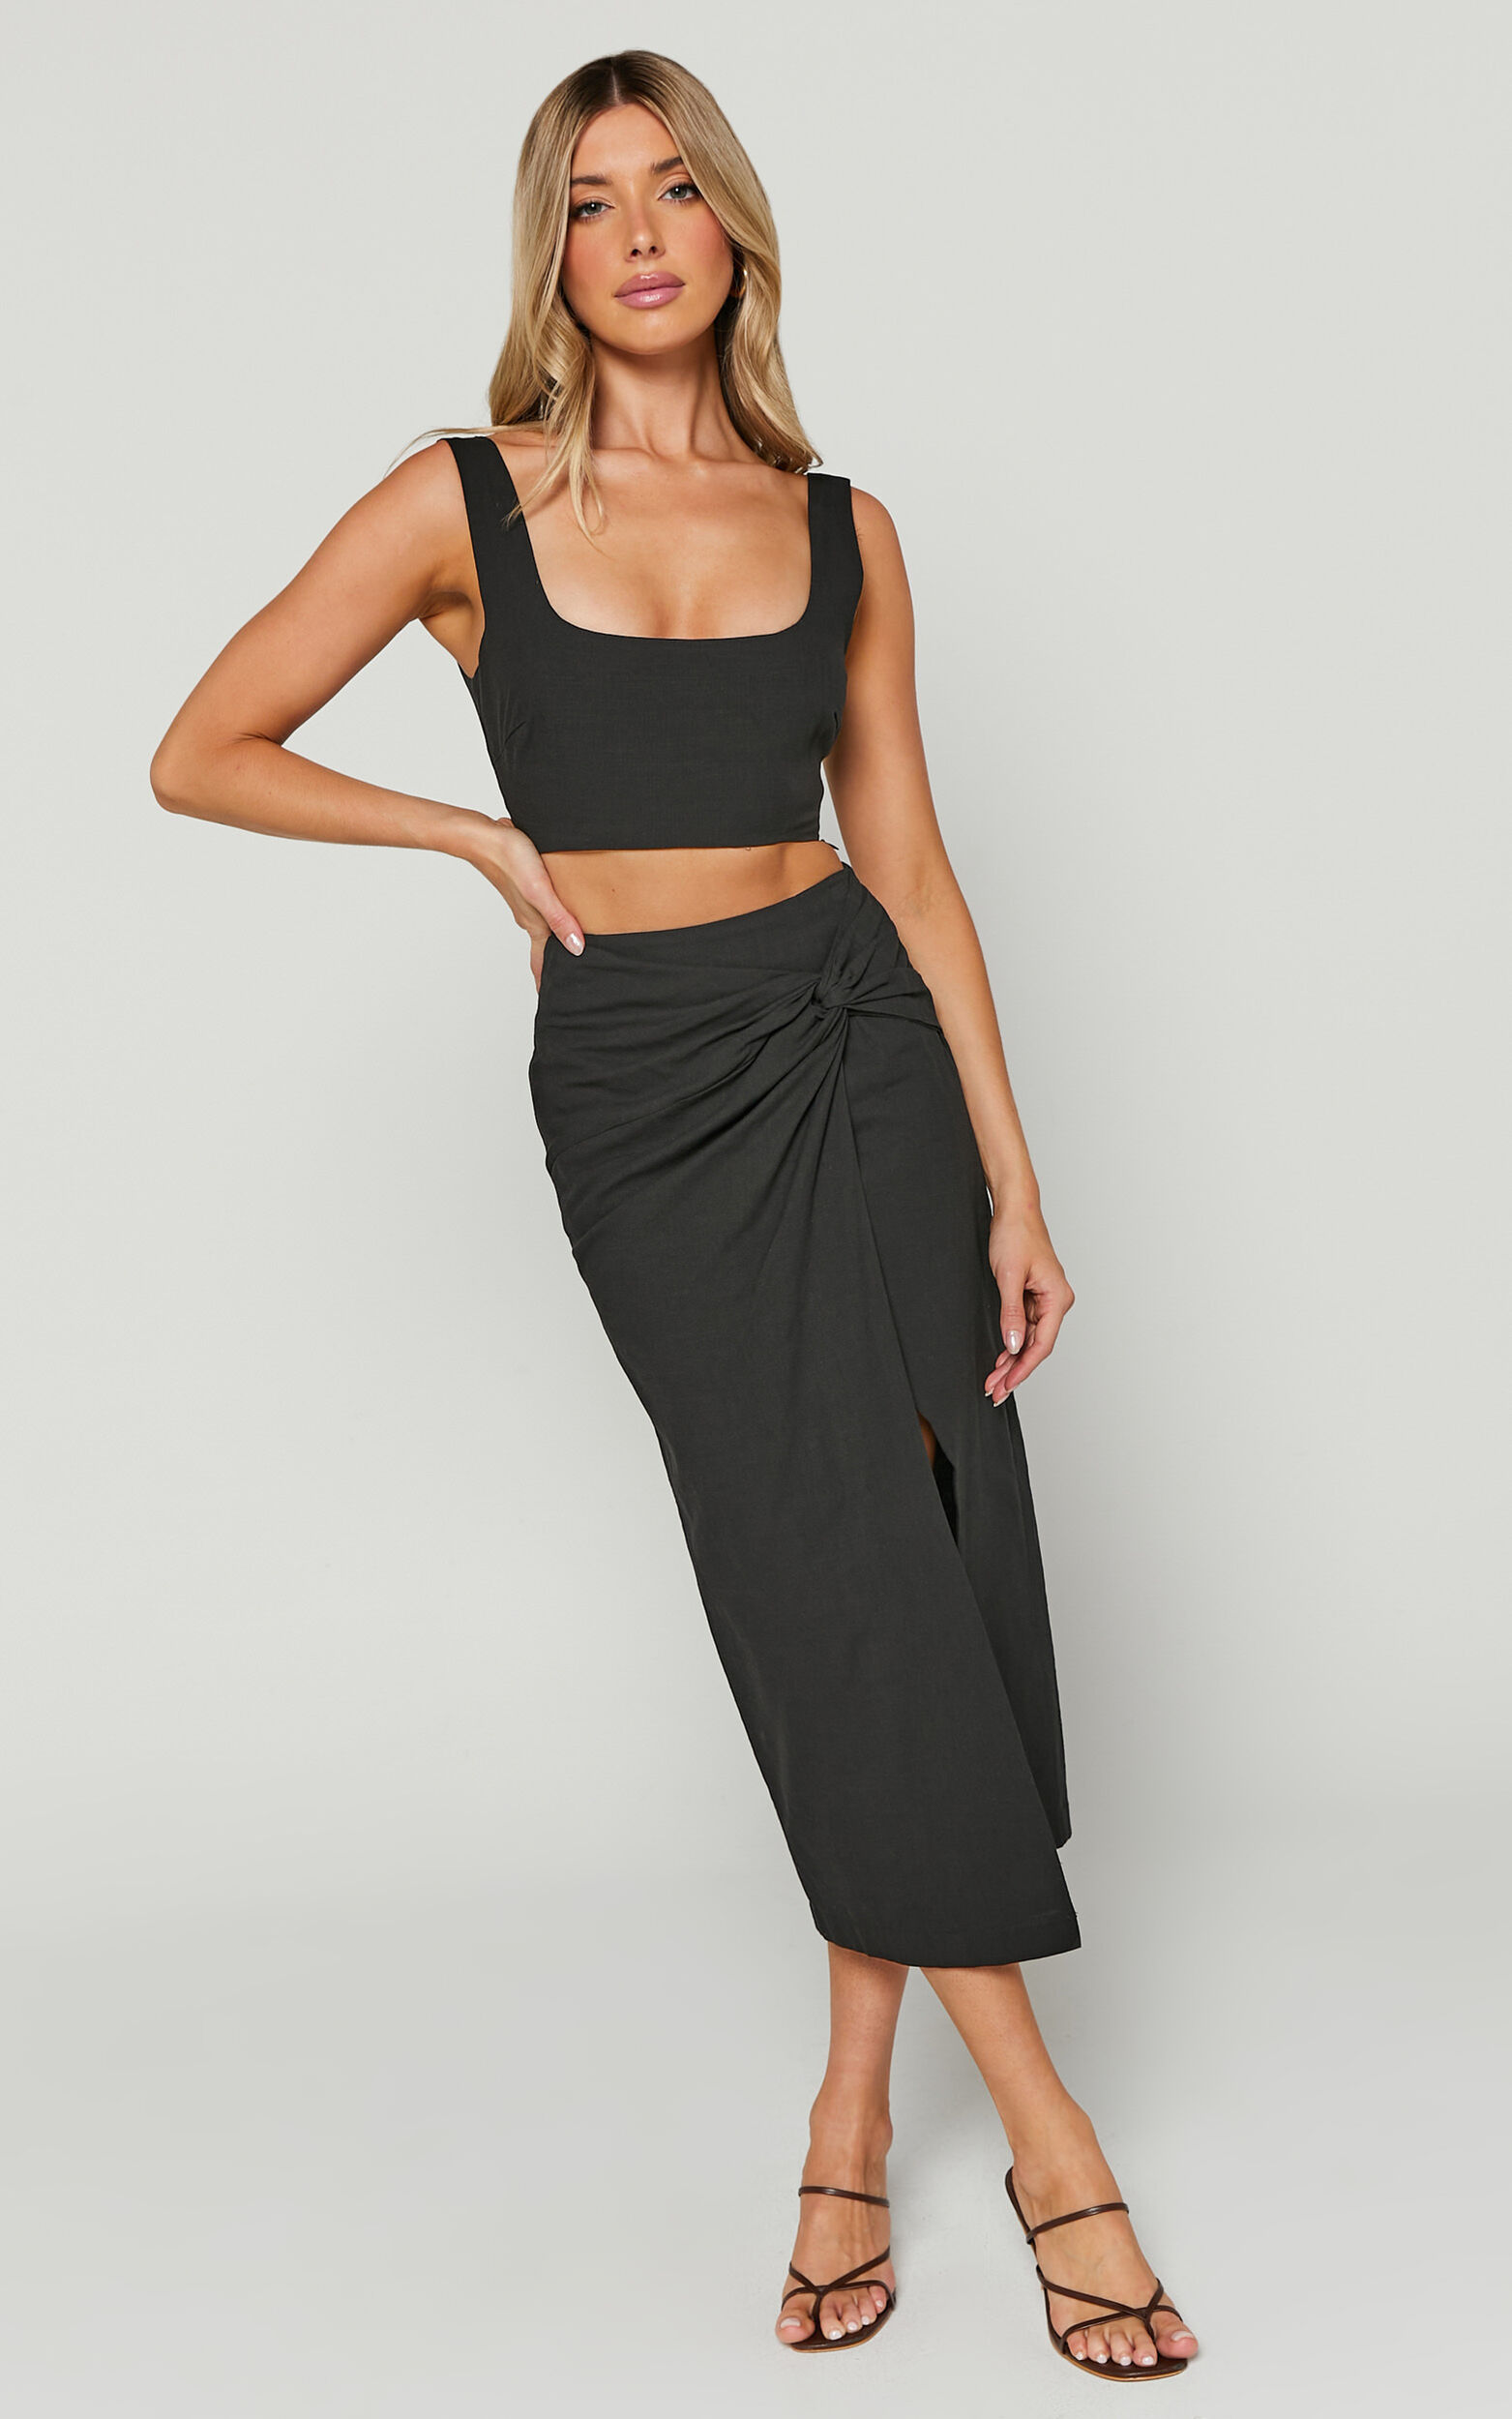 Gibson Two Piece Set - Crop Top and Knot Front Midi Skirt Set in Black - 06, BLK1